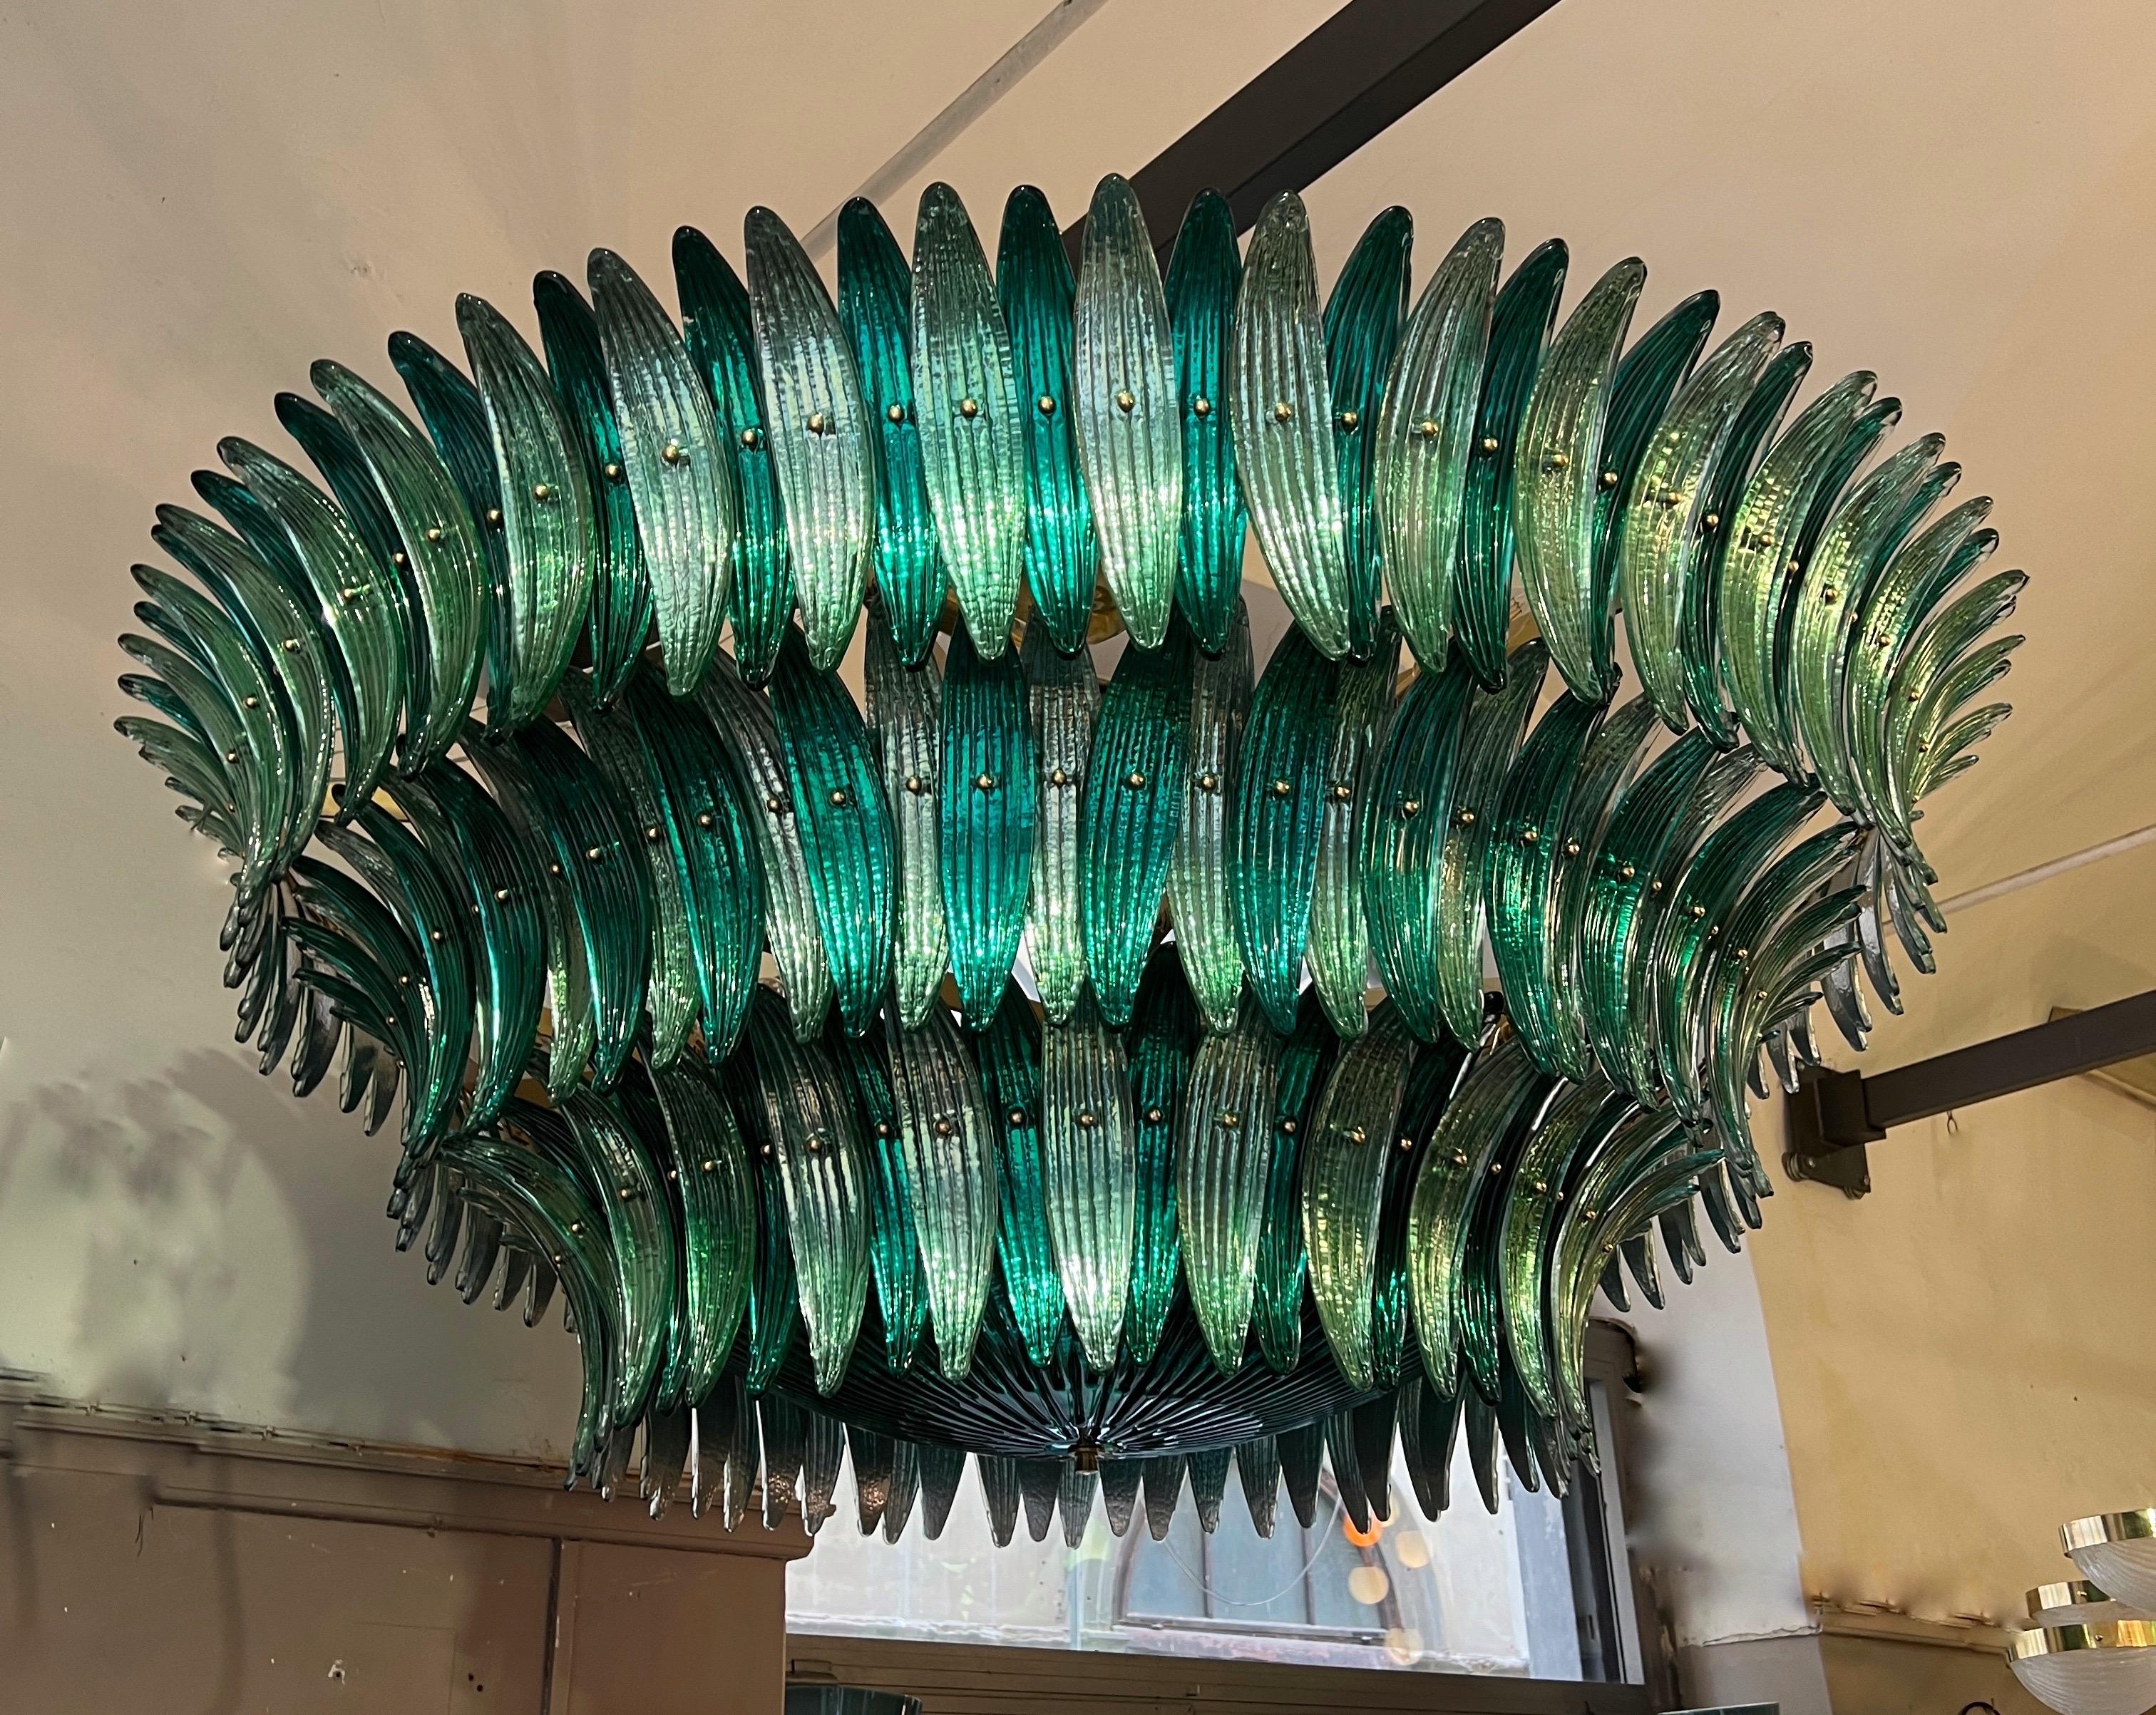 Two Tones Mirrored Green Murano Glass Leaves Chandelier. 
The mirrored glass leaves in the two light-dark tones alternate one after the other.
The structure is made of brass, the chandelier has 36  lights bulbs.